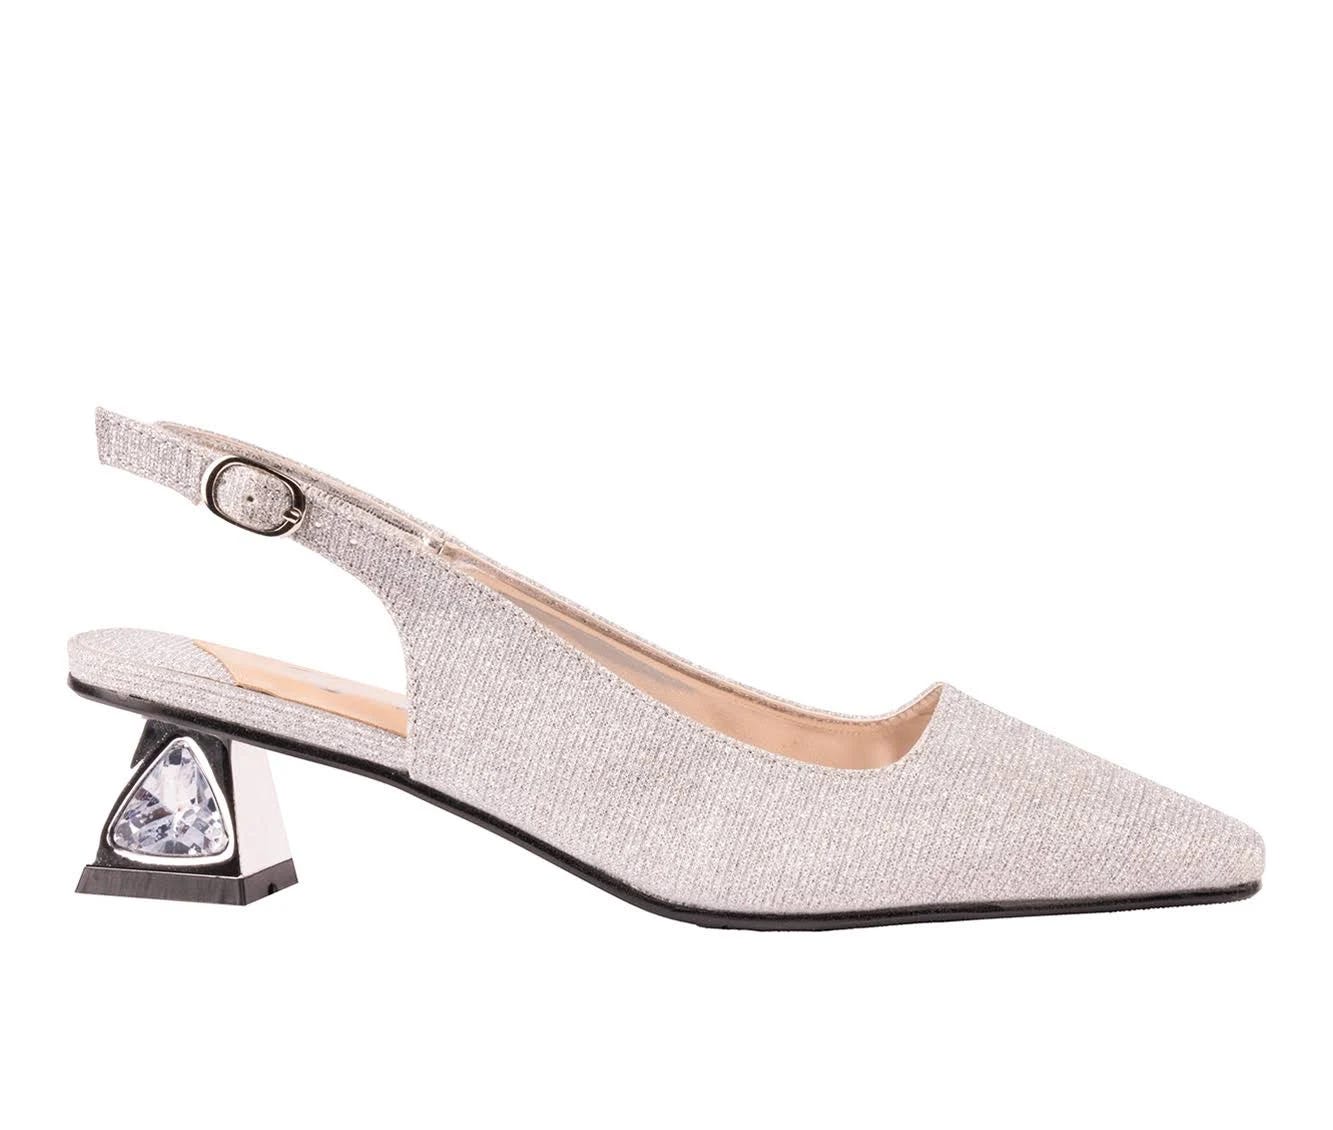 Lady Couture Ruby Silver Pumps with Embellished Heel | Image